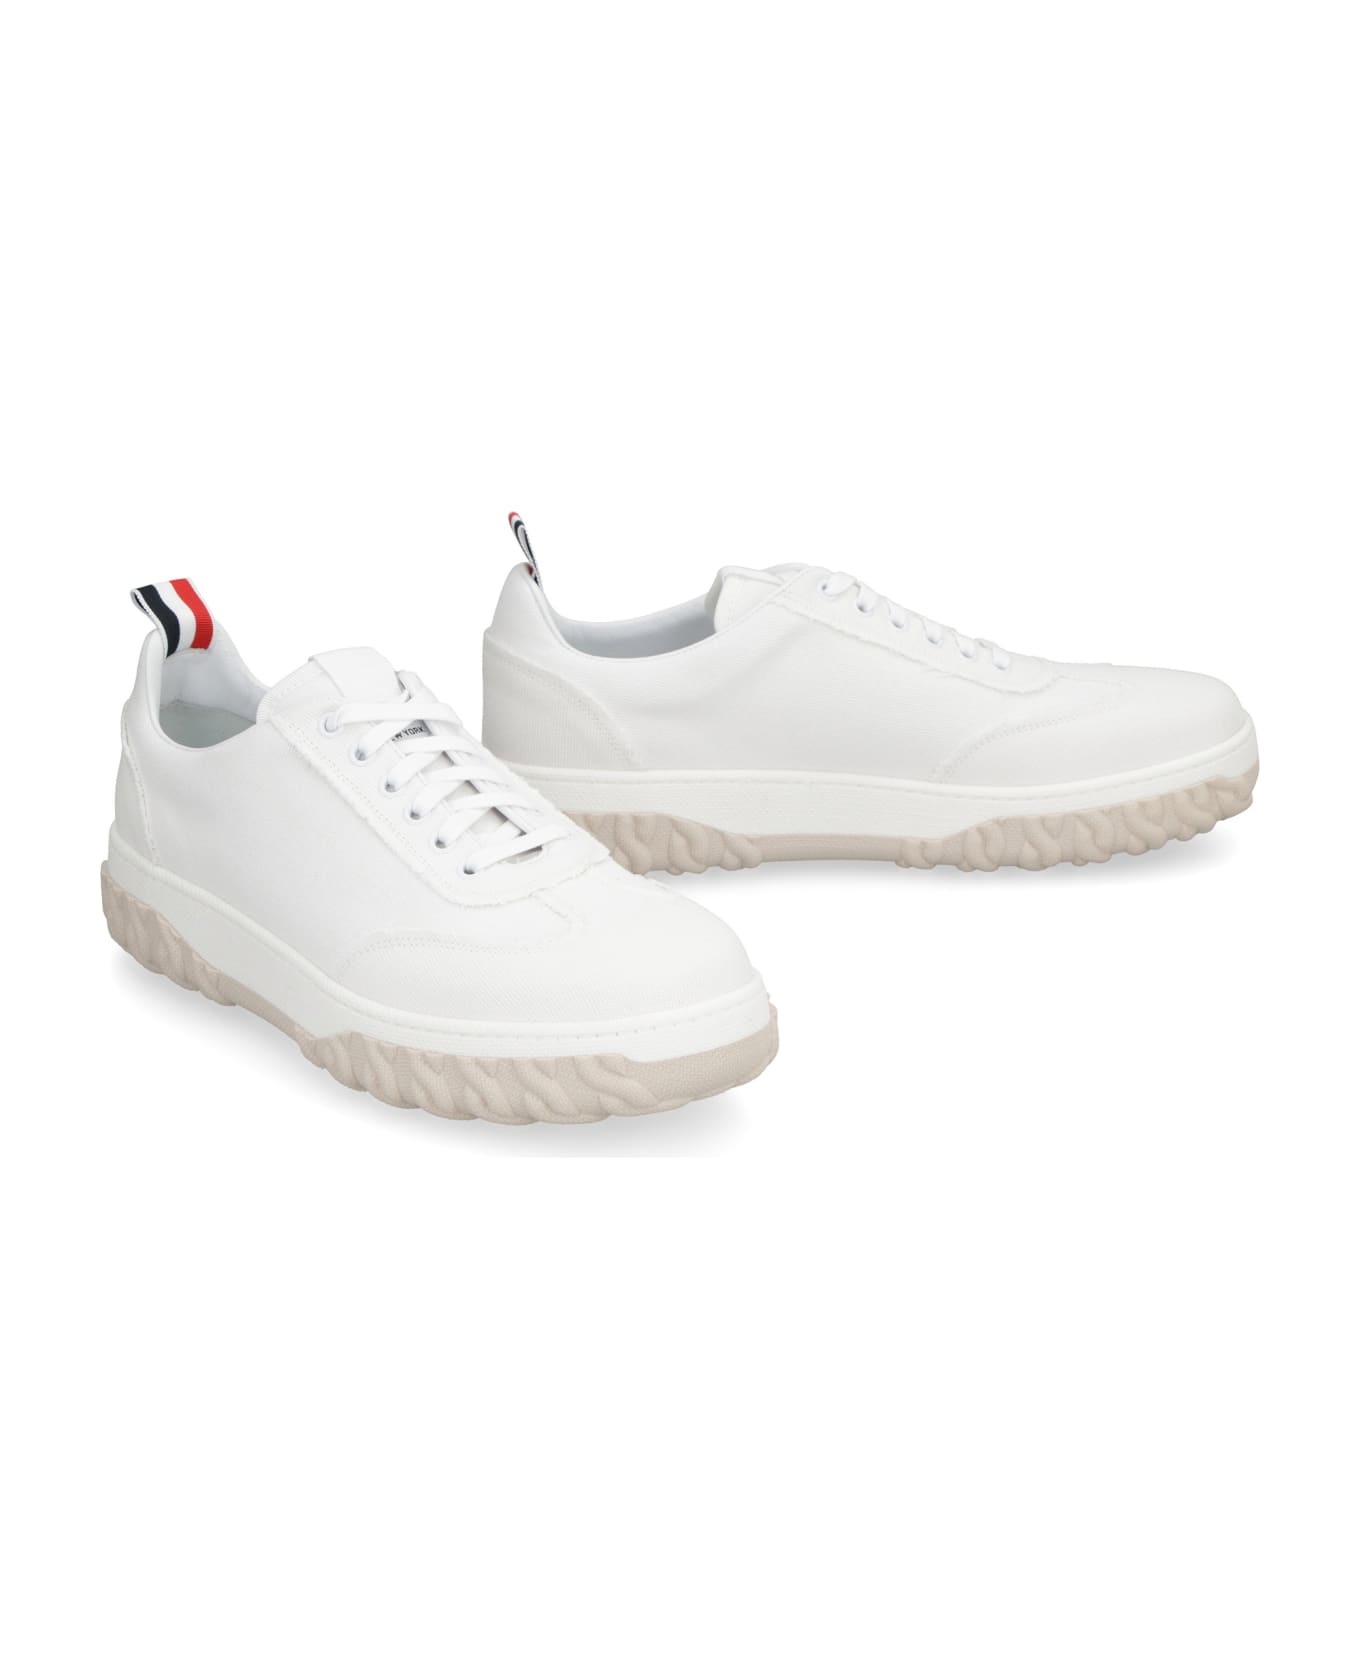 Thom Browne Field Canvas Sneakers - White スニーカー